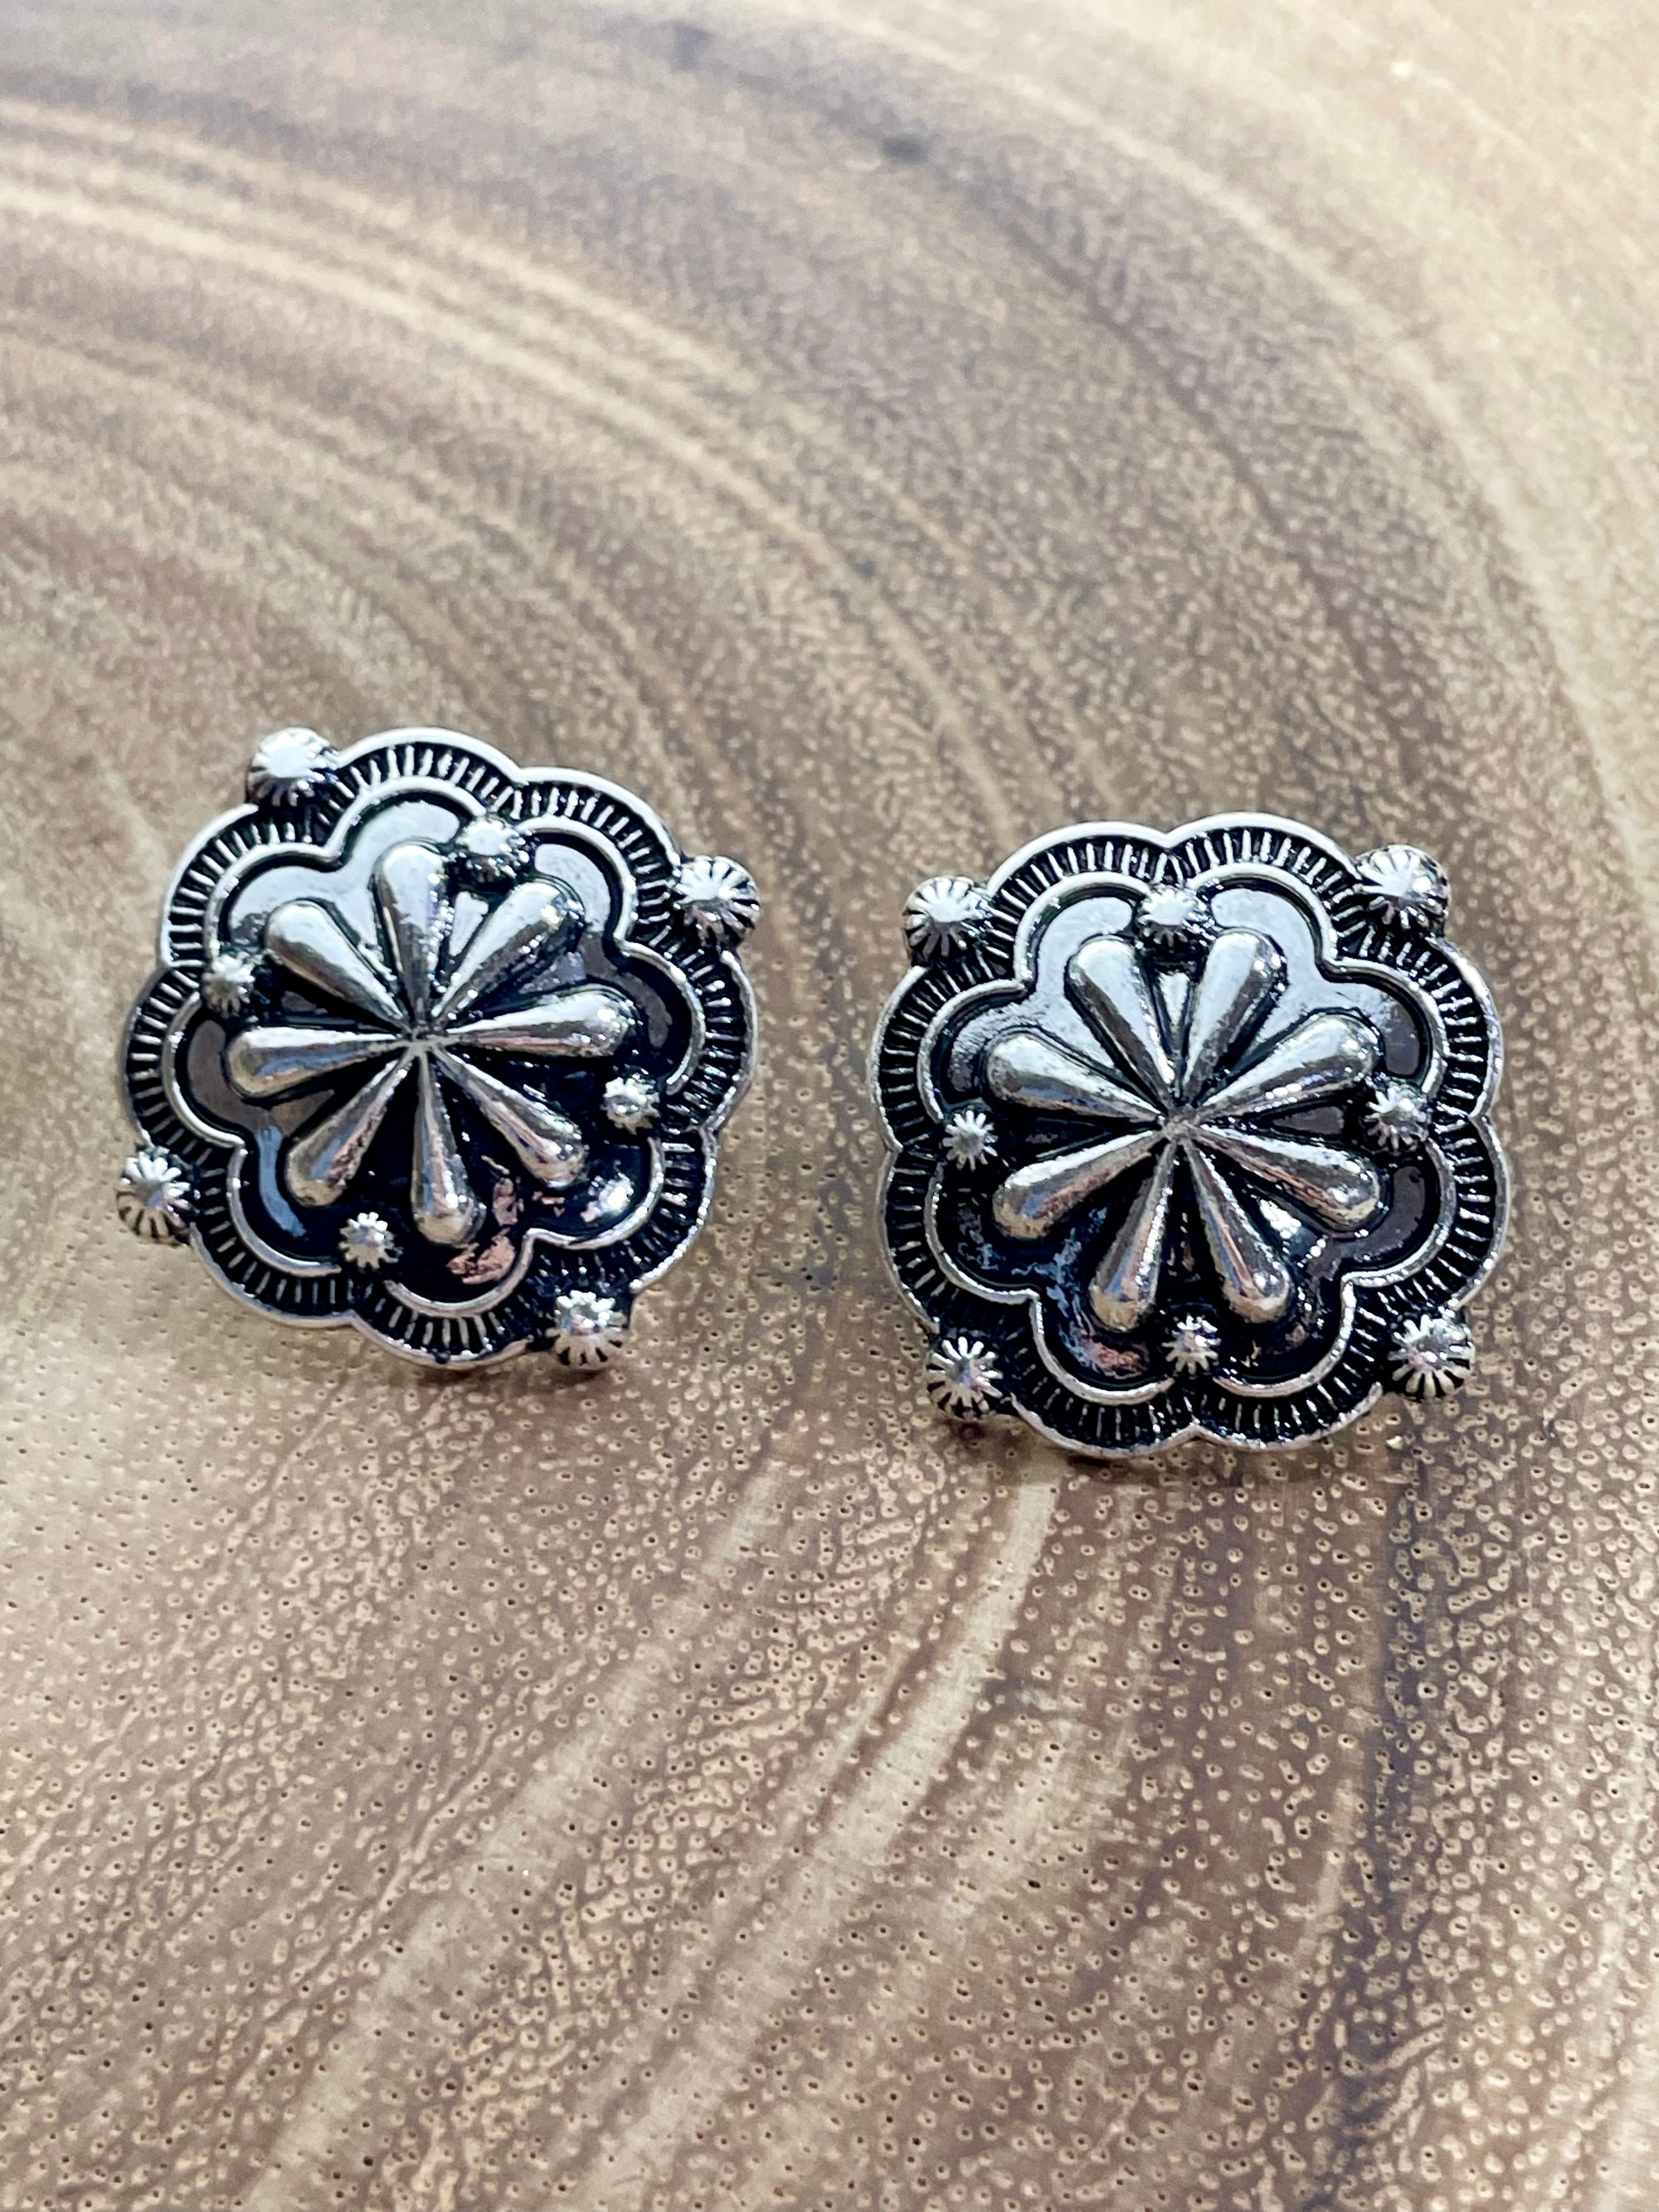 Queensland Stamped Silver Concho Earrings - 1"